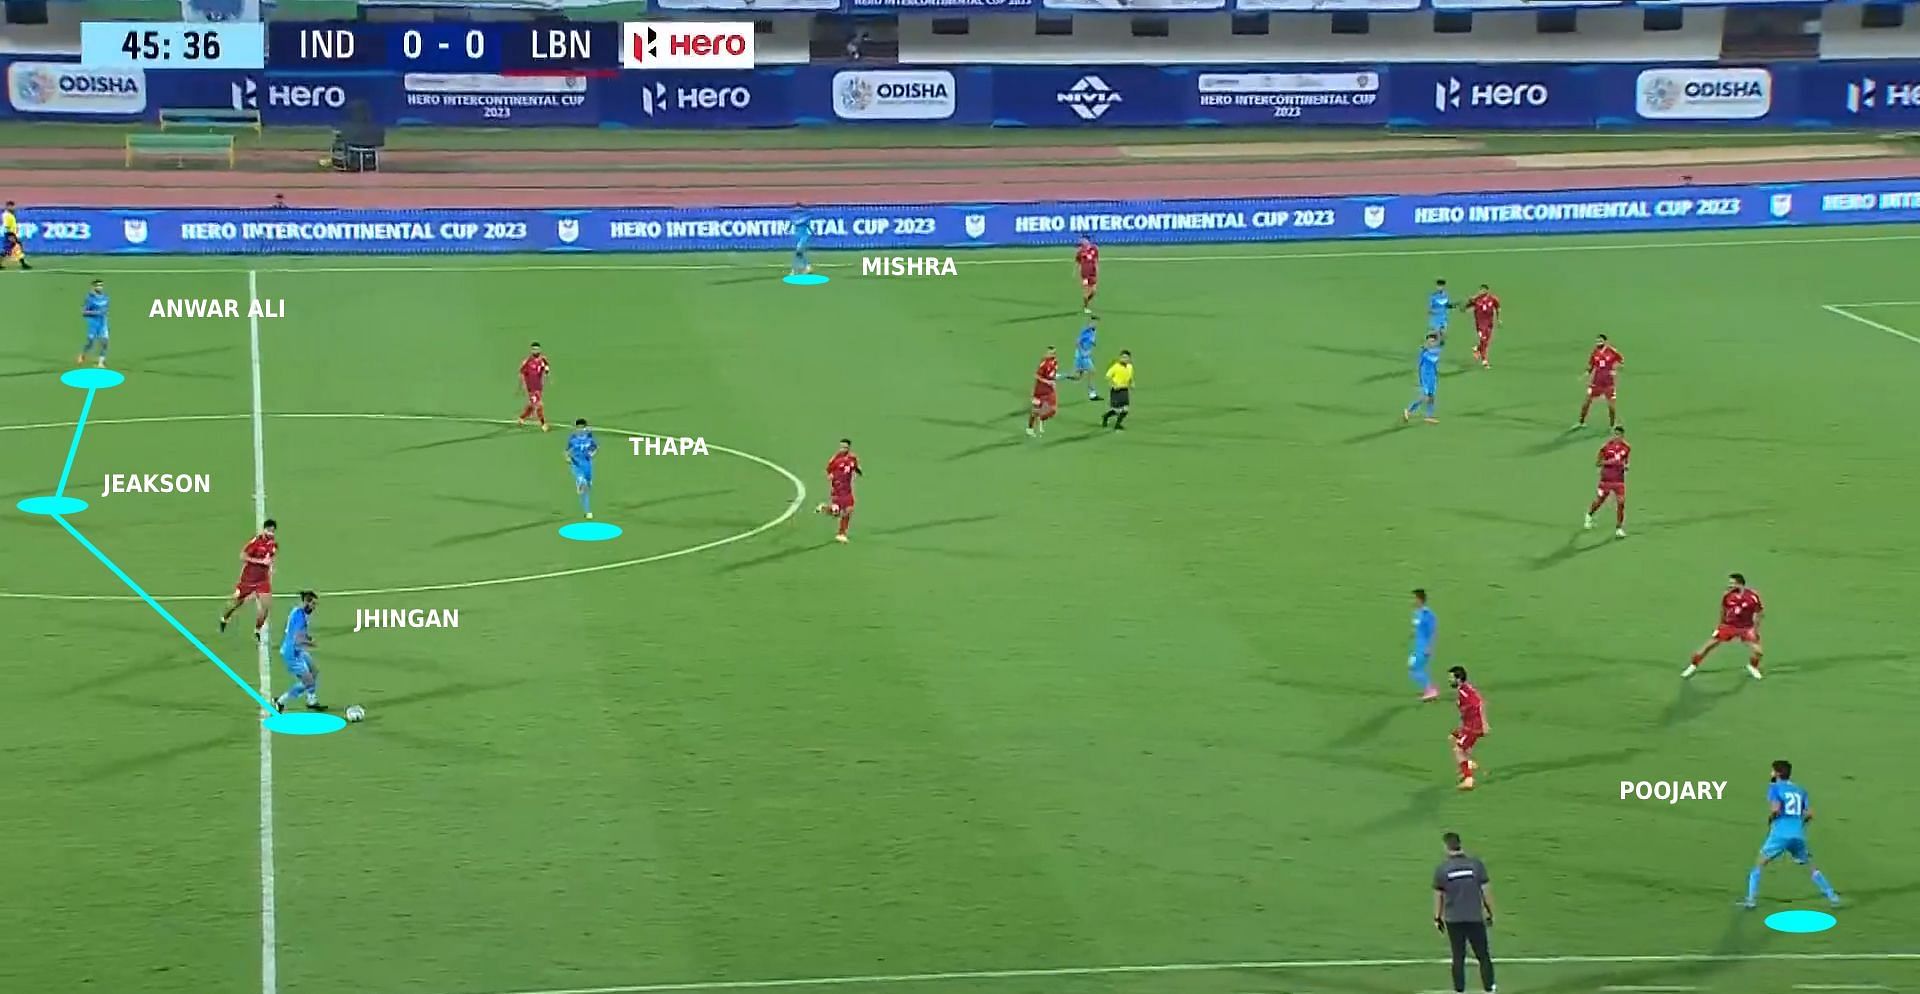 The Blue Tigers&#039; initial shape during the buildup (Image Credits: Hotstar)